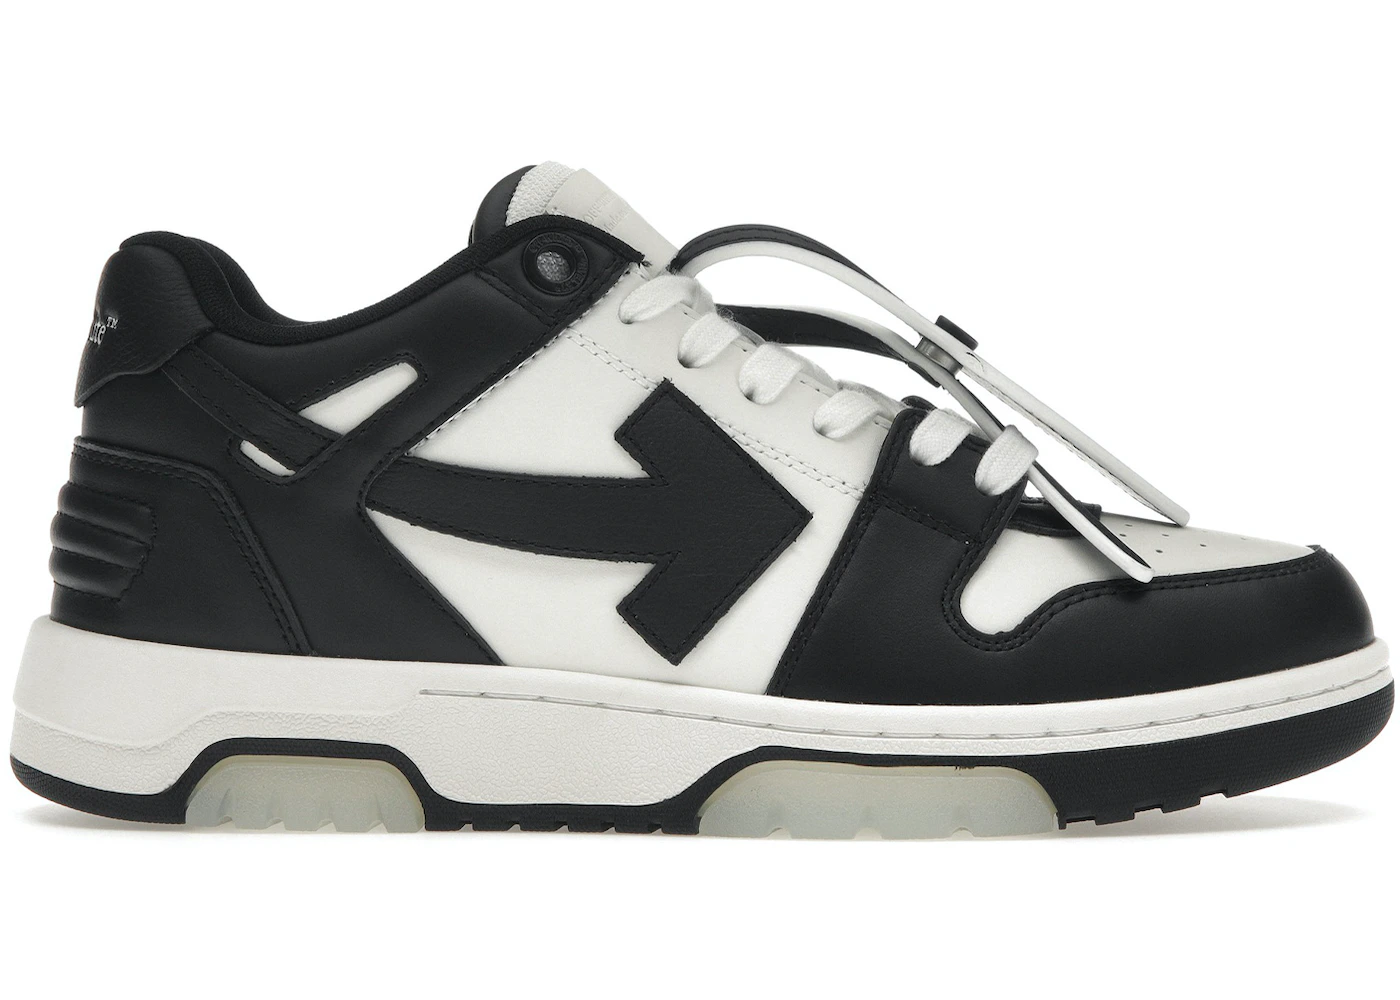 Off-White Out Of Office Calf Leather Panda (Women's) - OWIA259C99 ...